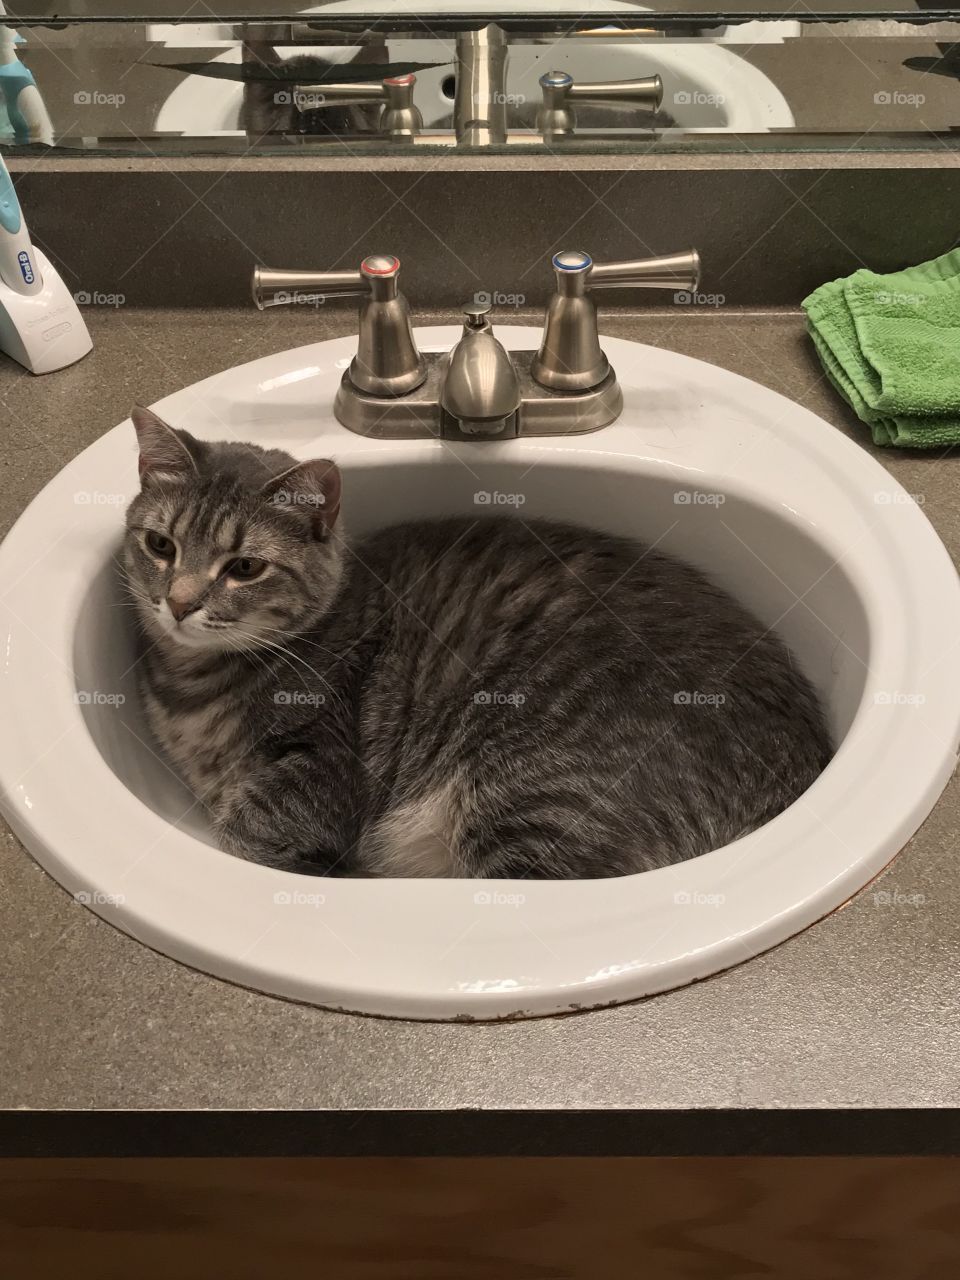 Edie laying in her favorite place!!!  What is it with cats laying in the sink that’s cute?